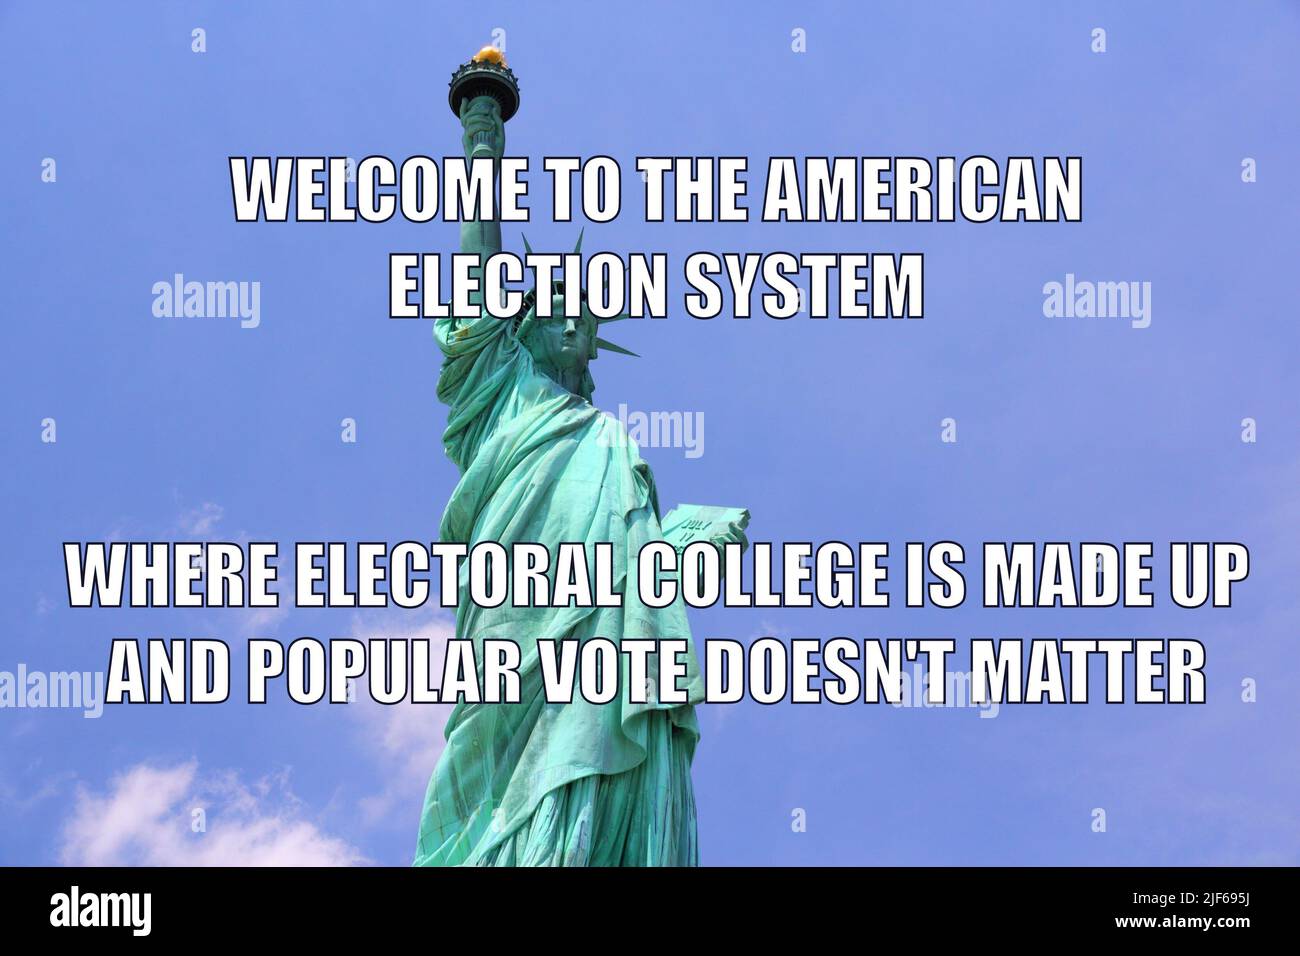 American election system funny meme for social media sharing. Humor about US politics, electoral college and elections. Stock Photo